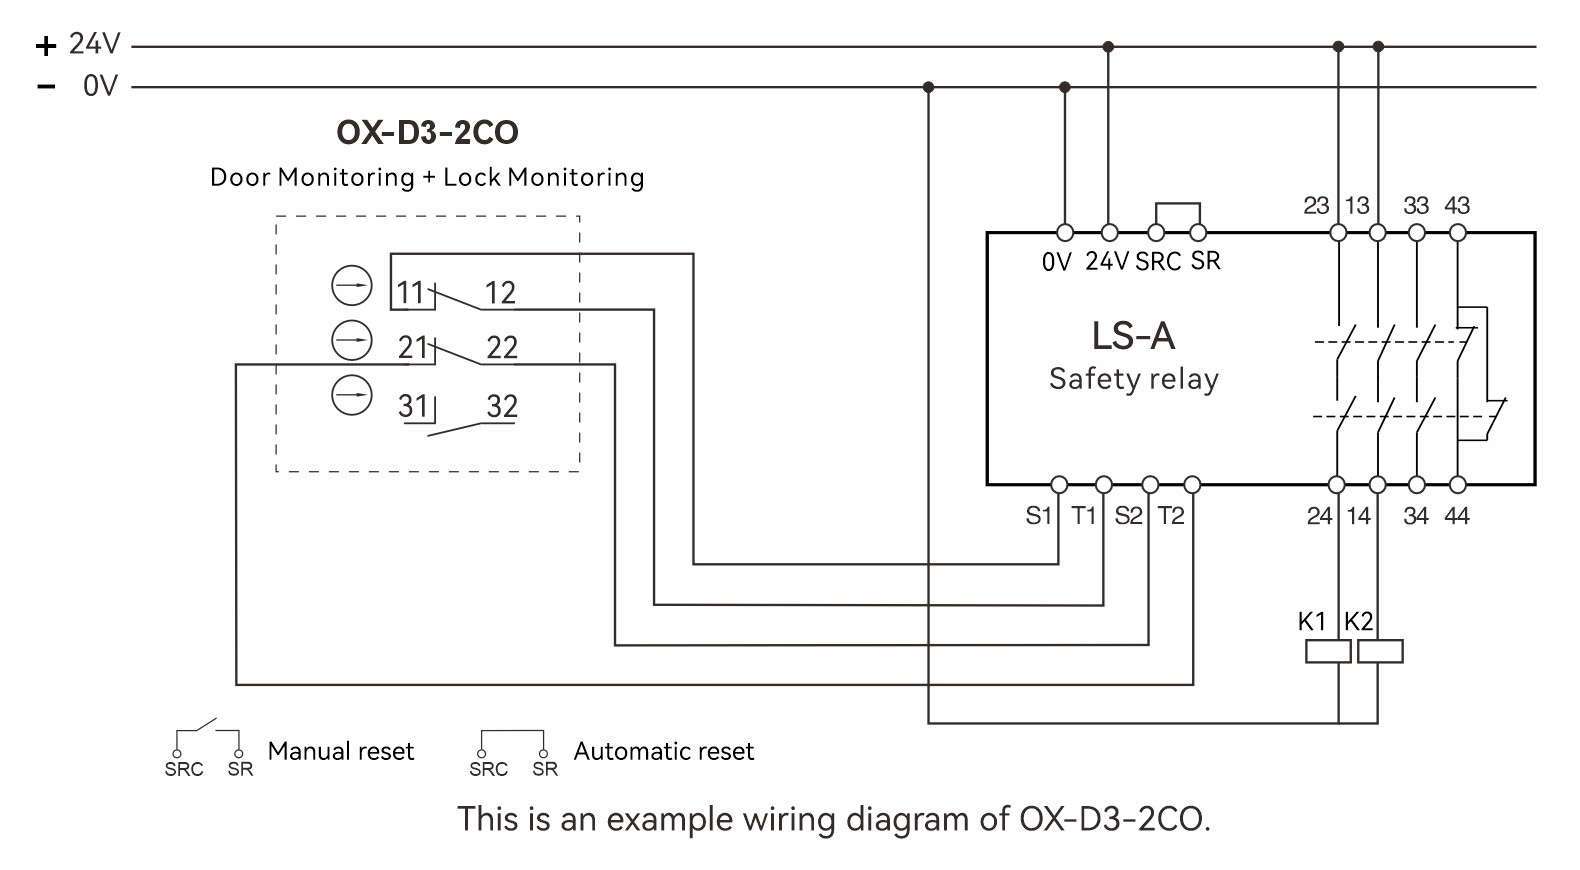 Wiring Diagram Between The Safety Switch and The LS-A Safety Relay